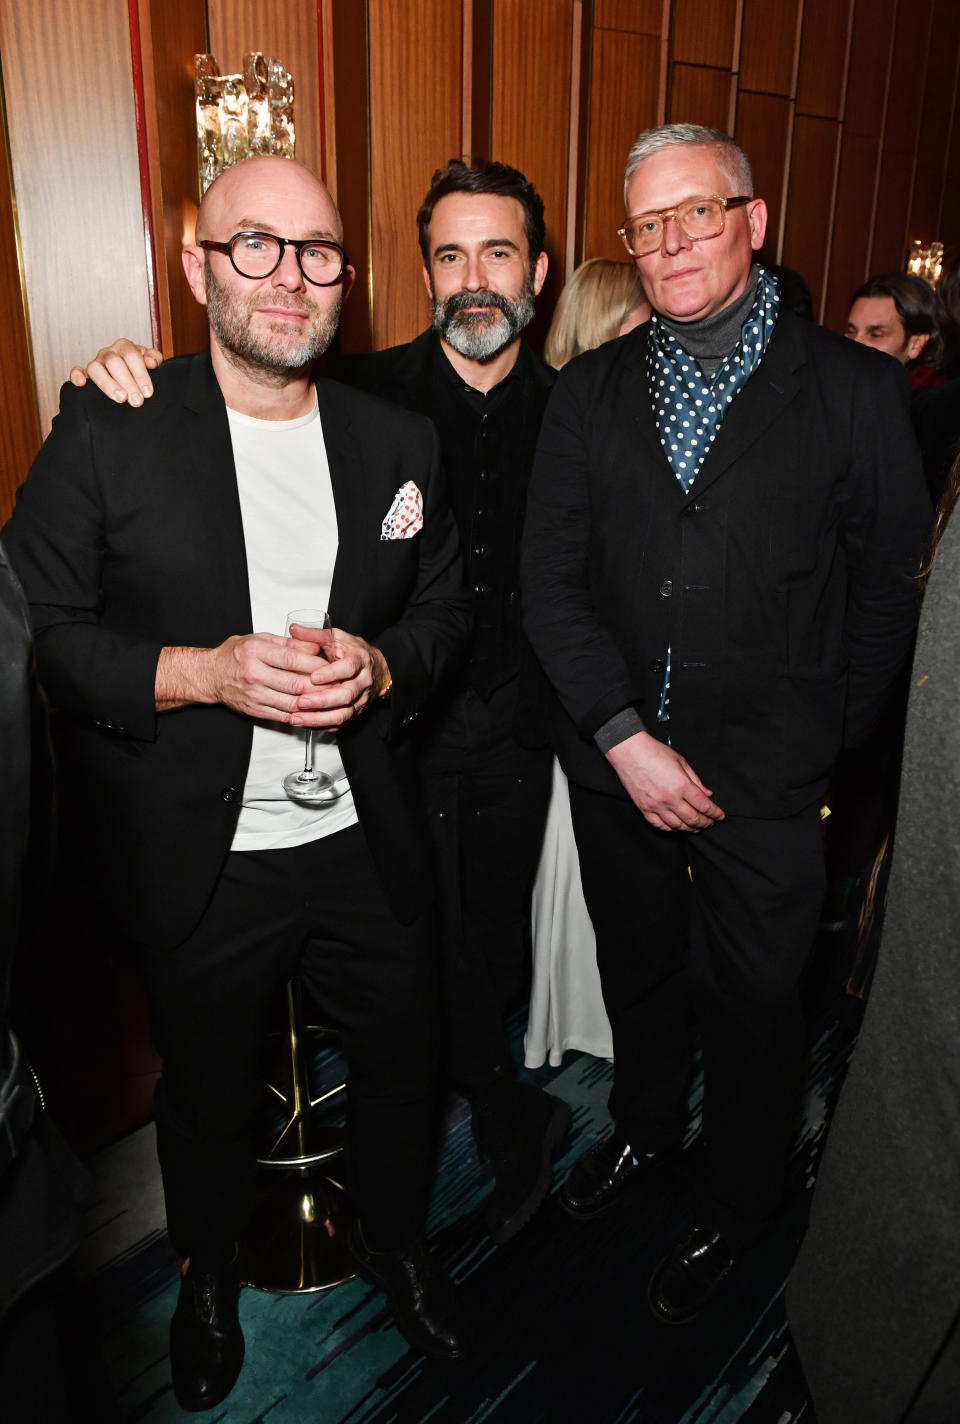 Solve Sundsbo, Daniel Roseberry and Giles Deacon attend a fundraising dinner hosted by Sarabande in Decimo at The Standard, London